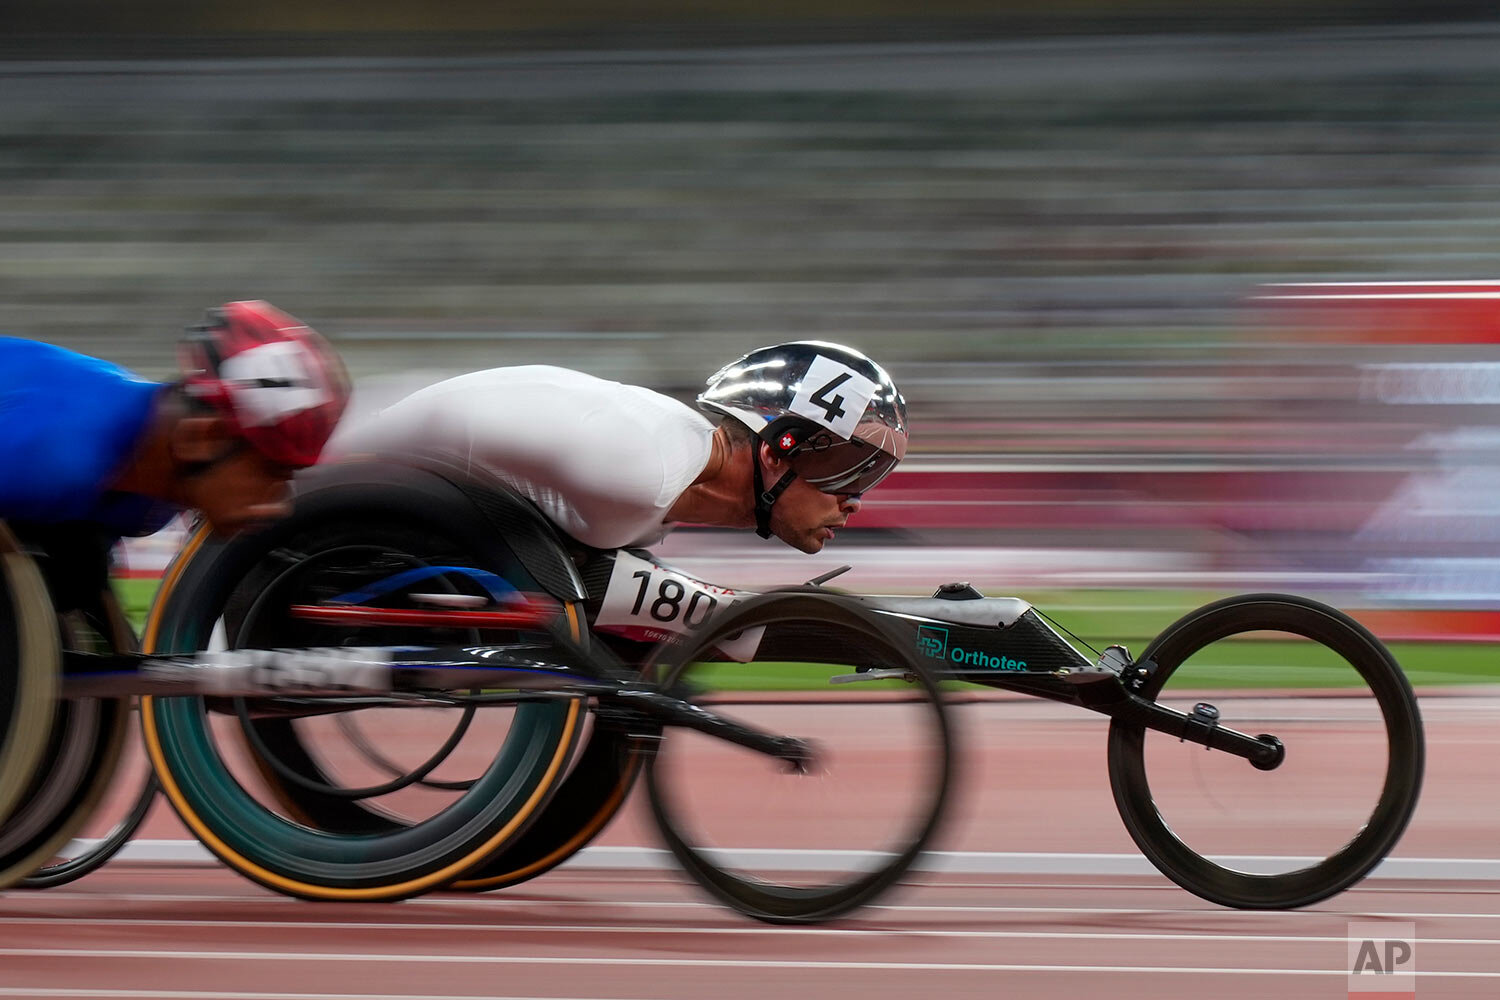  Switzerland's Marcel Hug, competes in the men's T54 5000-meters final during the 2020 Paralympics at the National Stadium in Tokyo, Saturday, Aug. 28, 2021. (AP Photo/Eugene Hoshiko) 